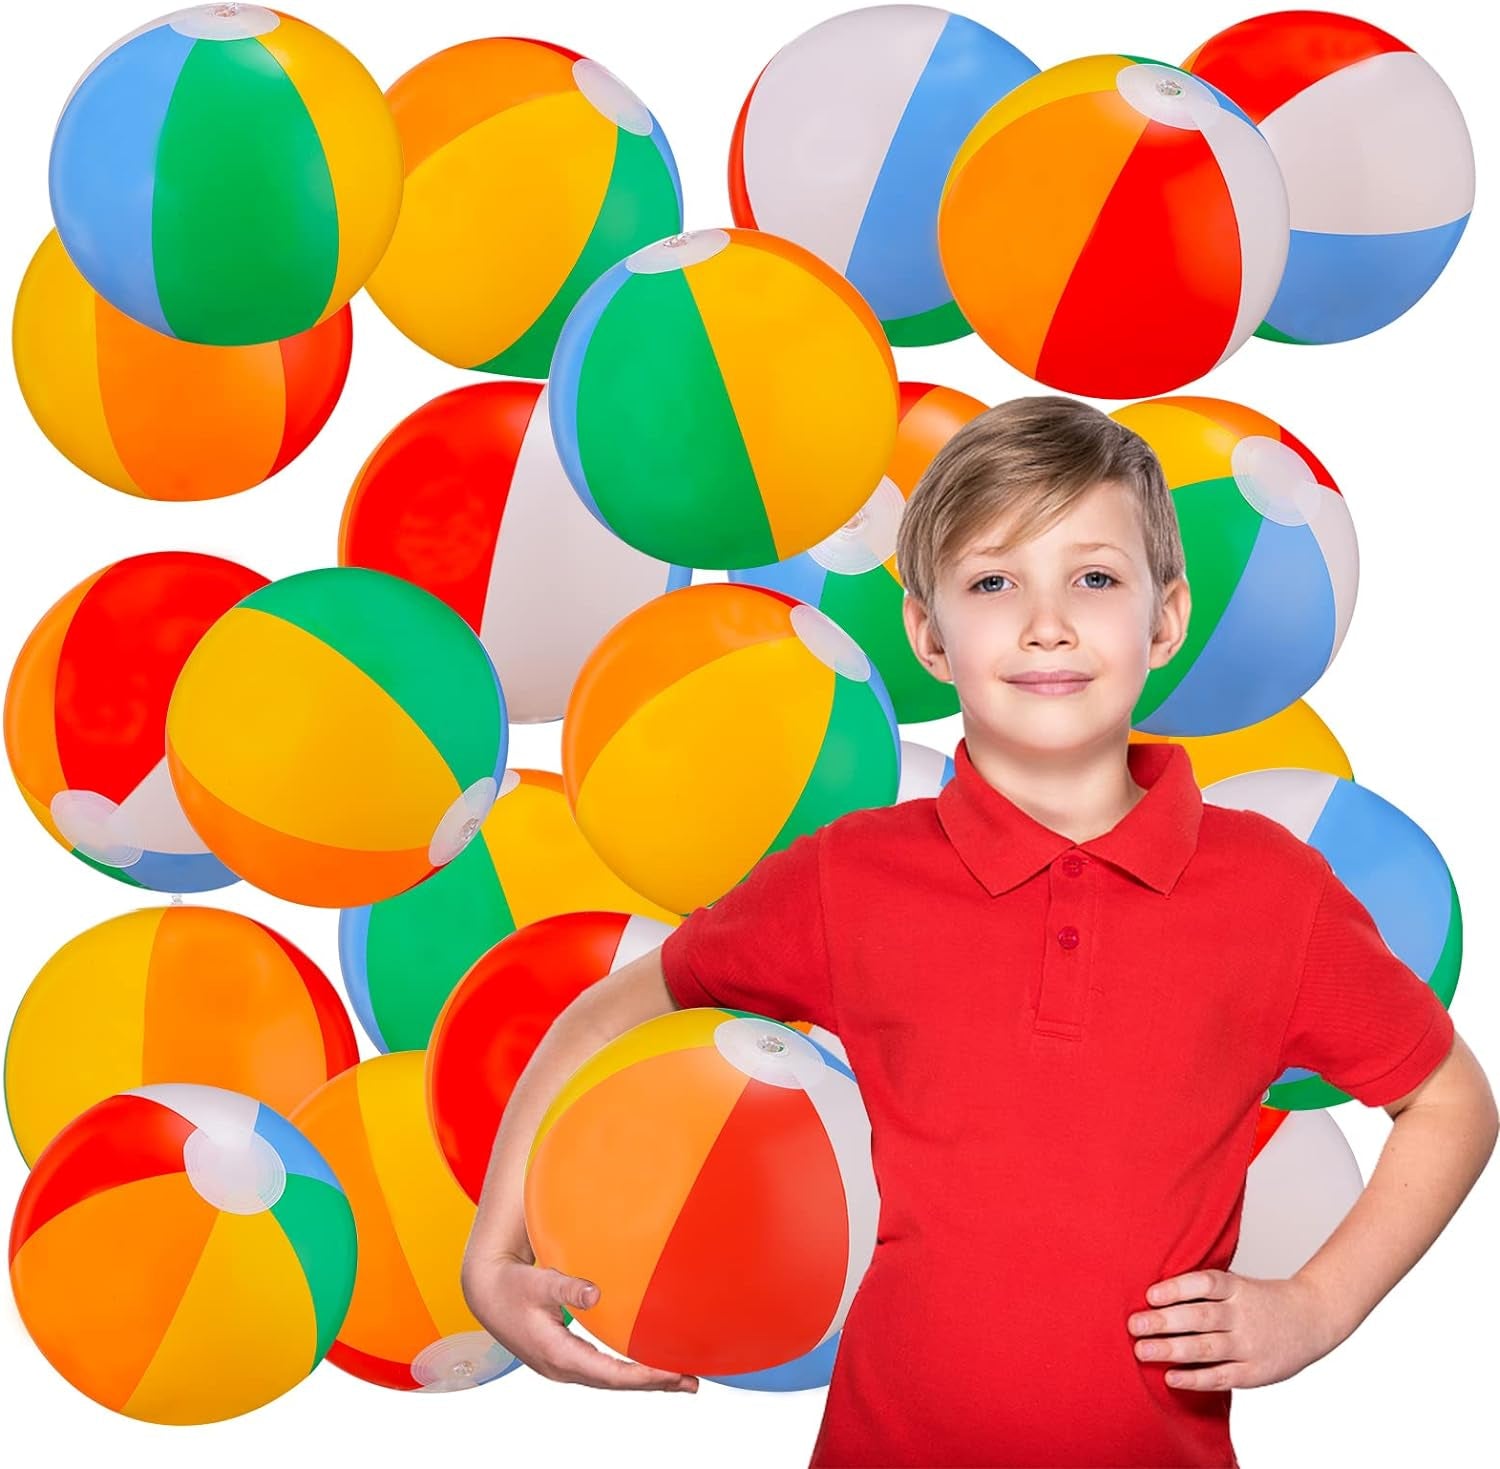 Beach Balls Bulk 24 Pack - 9" Inflatable Beachballs Swimming Pool Toys for Kids Summer Water Games, Kids Birthday Party Favors Lua/Hawaiian Tropical Theme Decorations Supplies